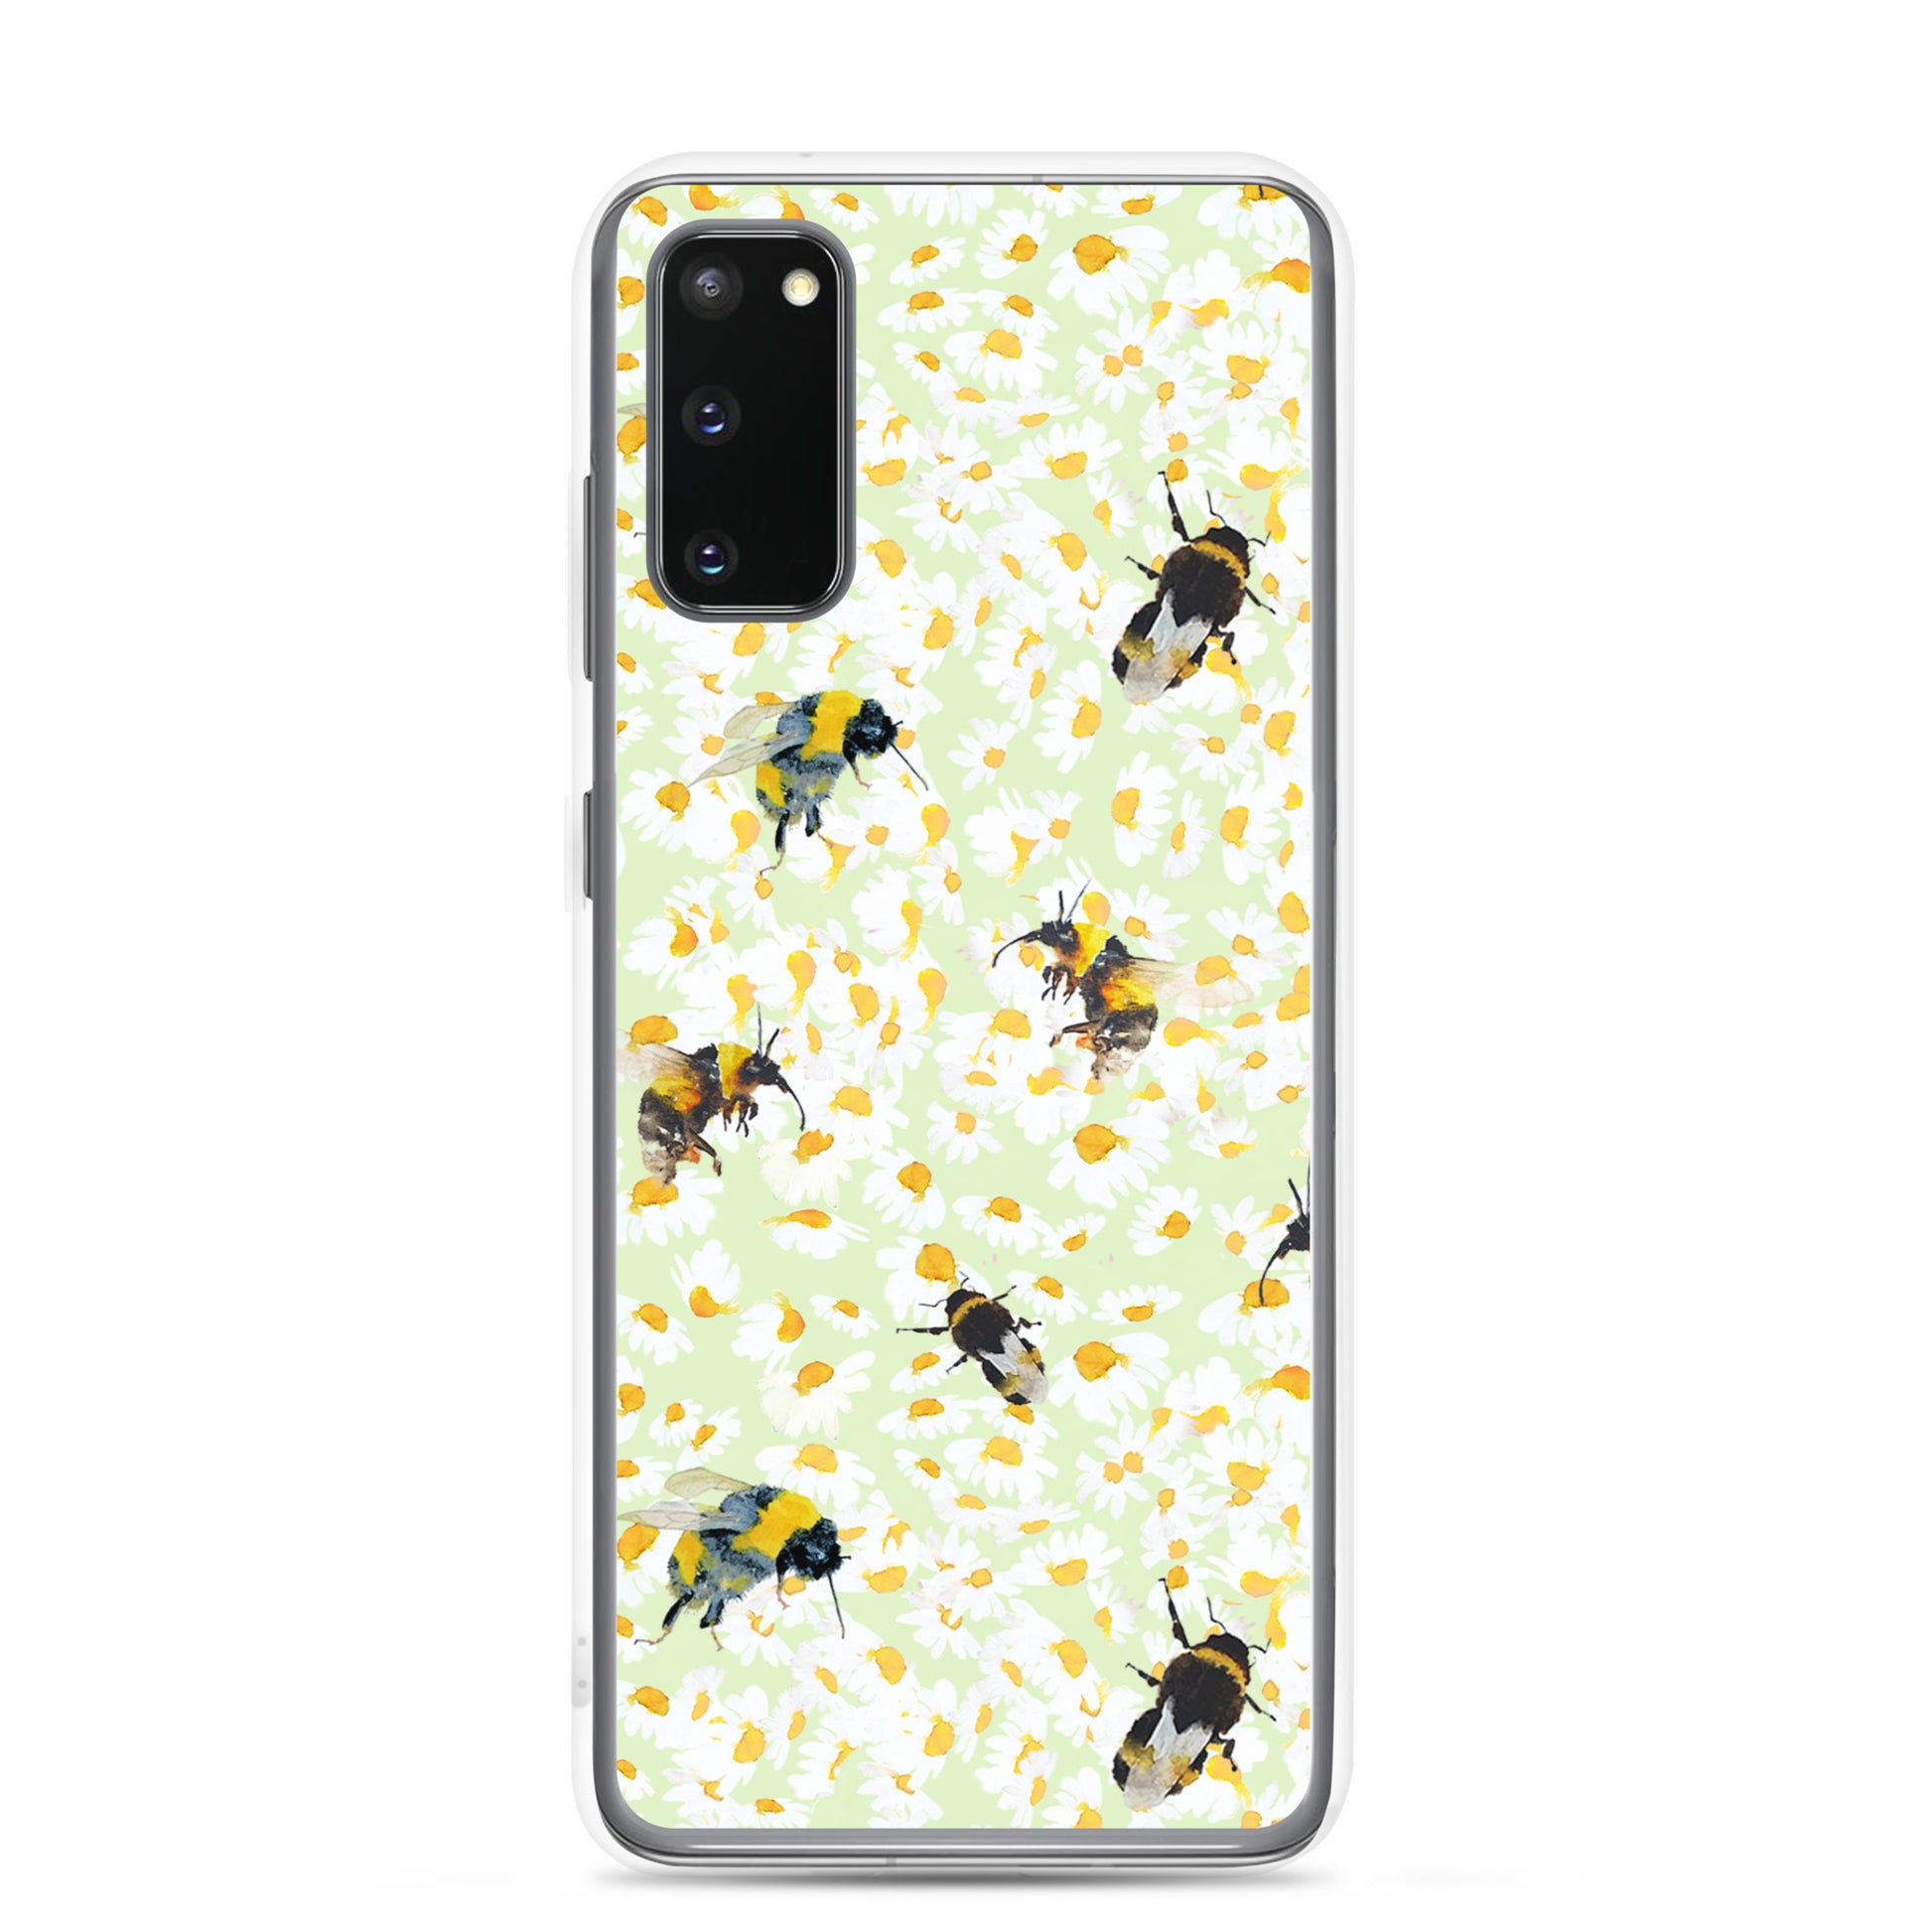 Bumblebee and Daisies Samsung Case by Artist Annie Grant